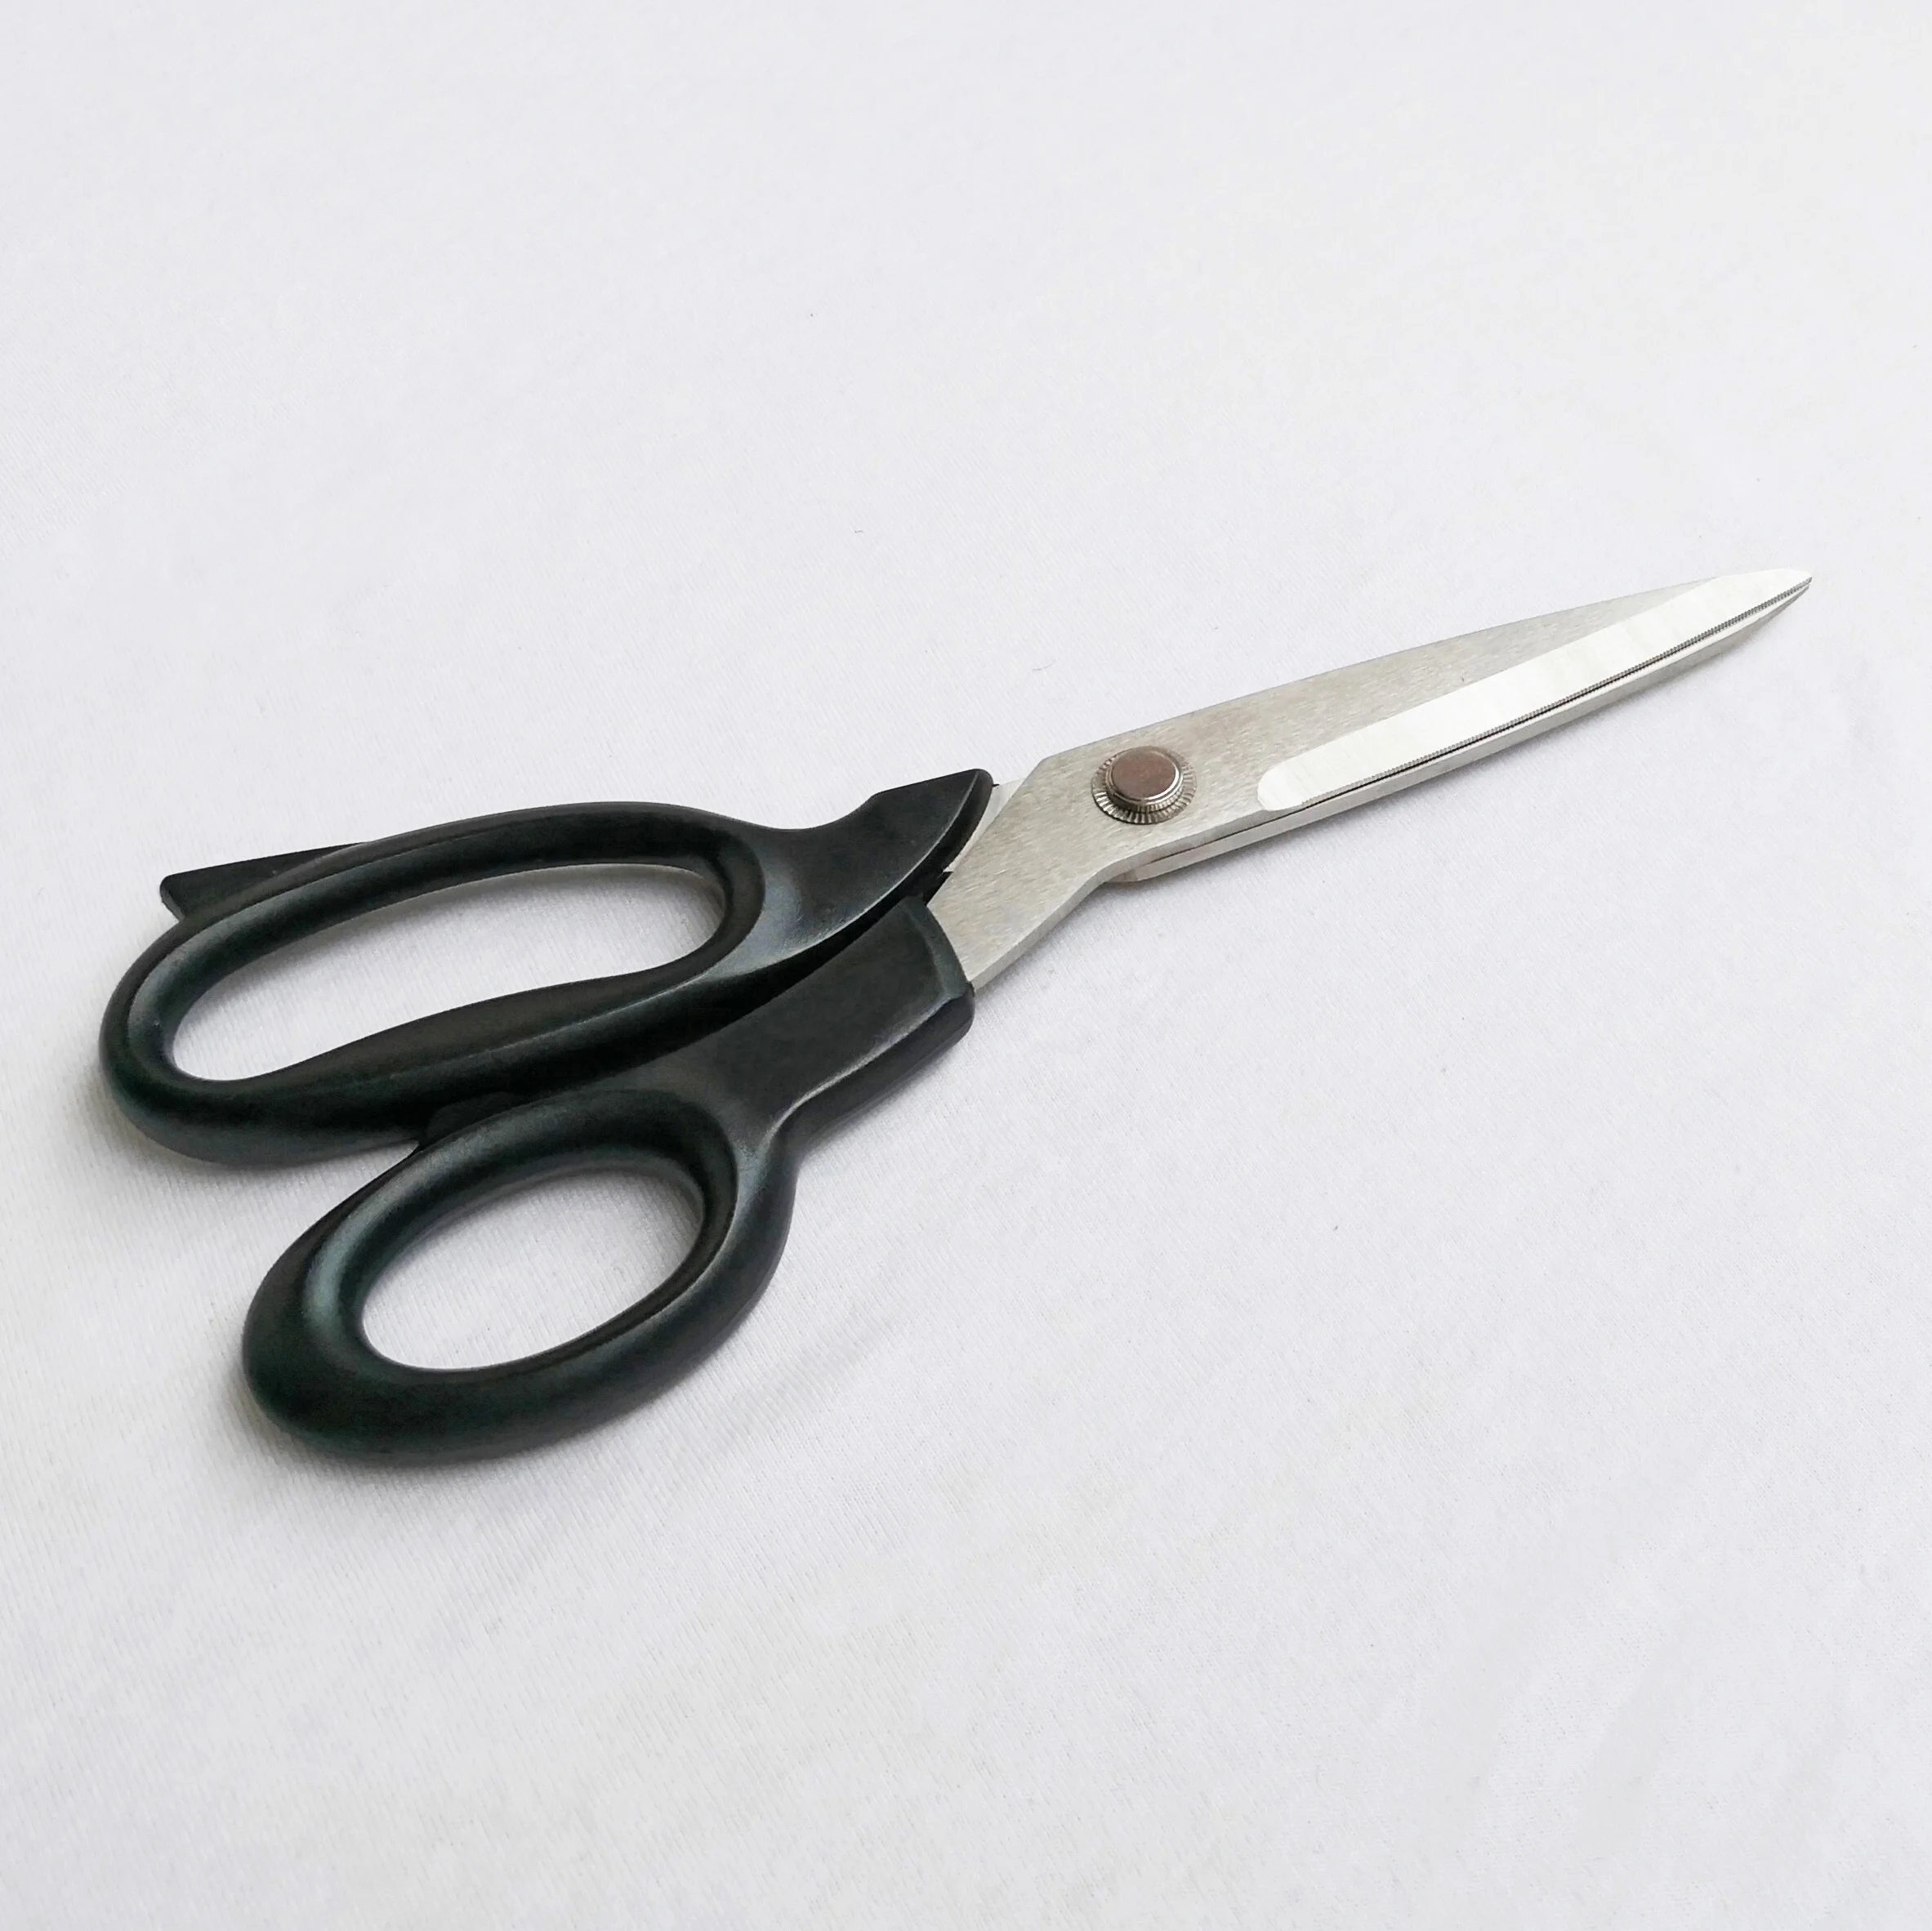 8″ professional Stainless steel tailoring scissors with plastic handle for cutting cloth of sewing